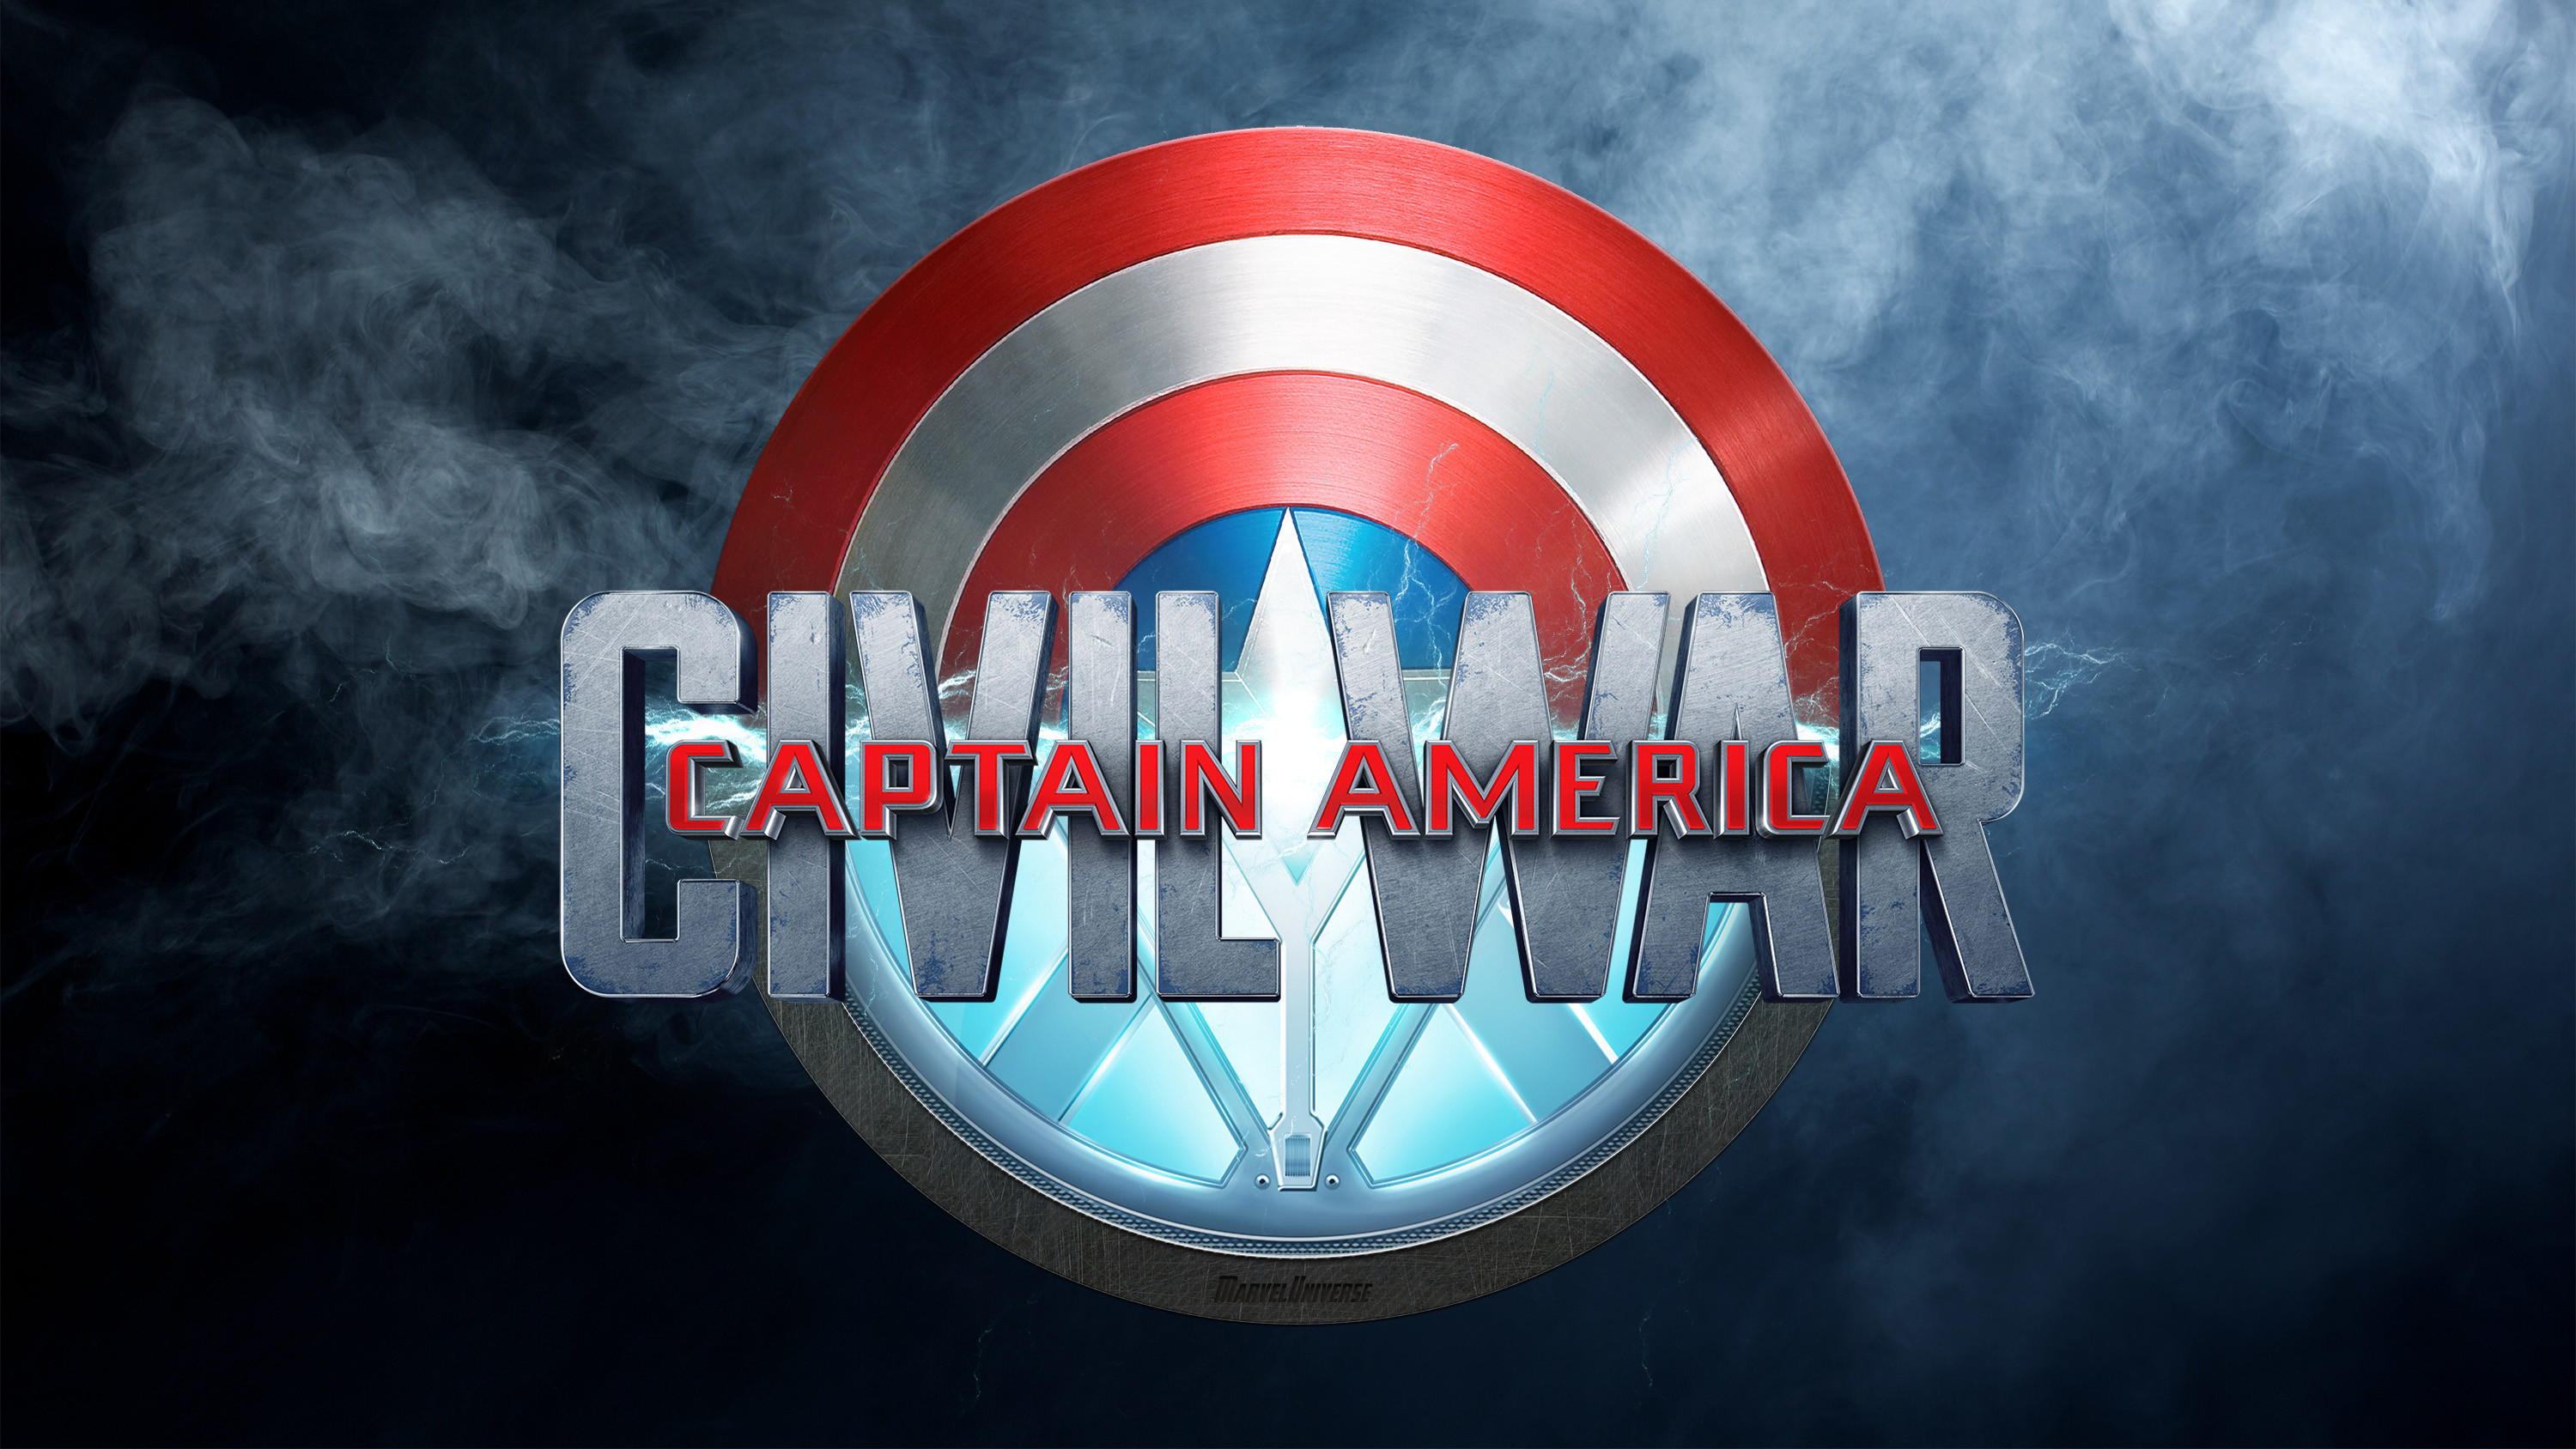 3000x1688 2560x1600 Providing you widescreen high defination Captain america civil  war wallpaper.Choose one of the best wallpapers and apply this on your  computer ...